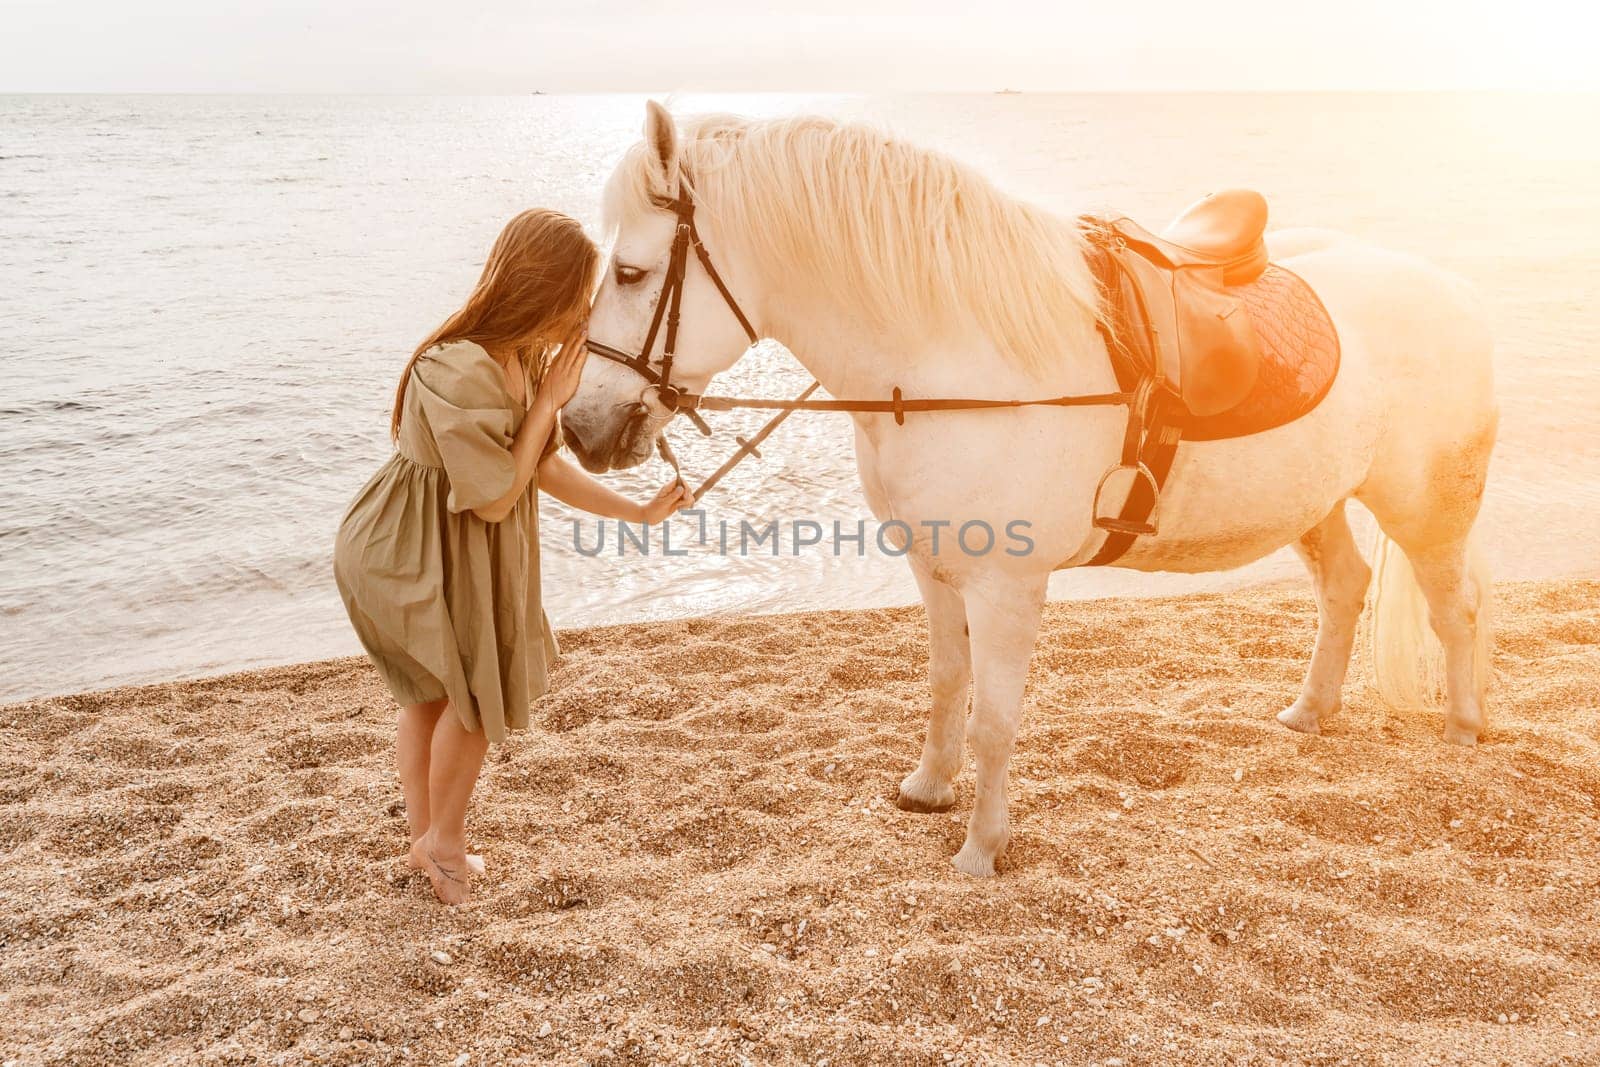 A white horse and a woman in a dress stand on a beach, with the by Matiunina